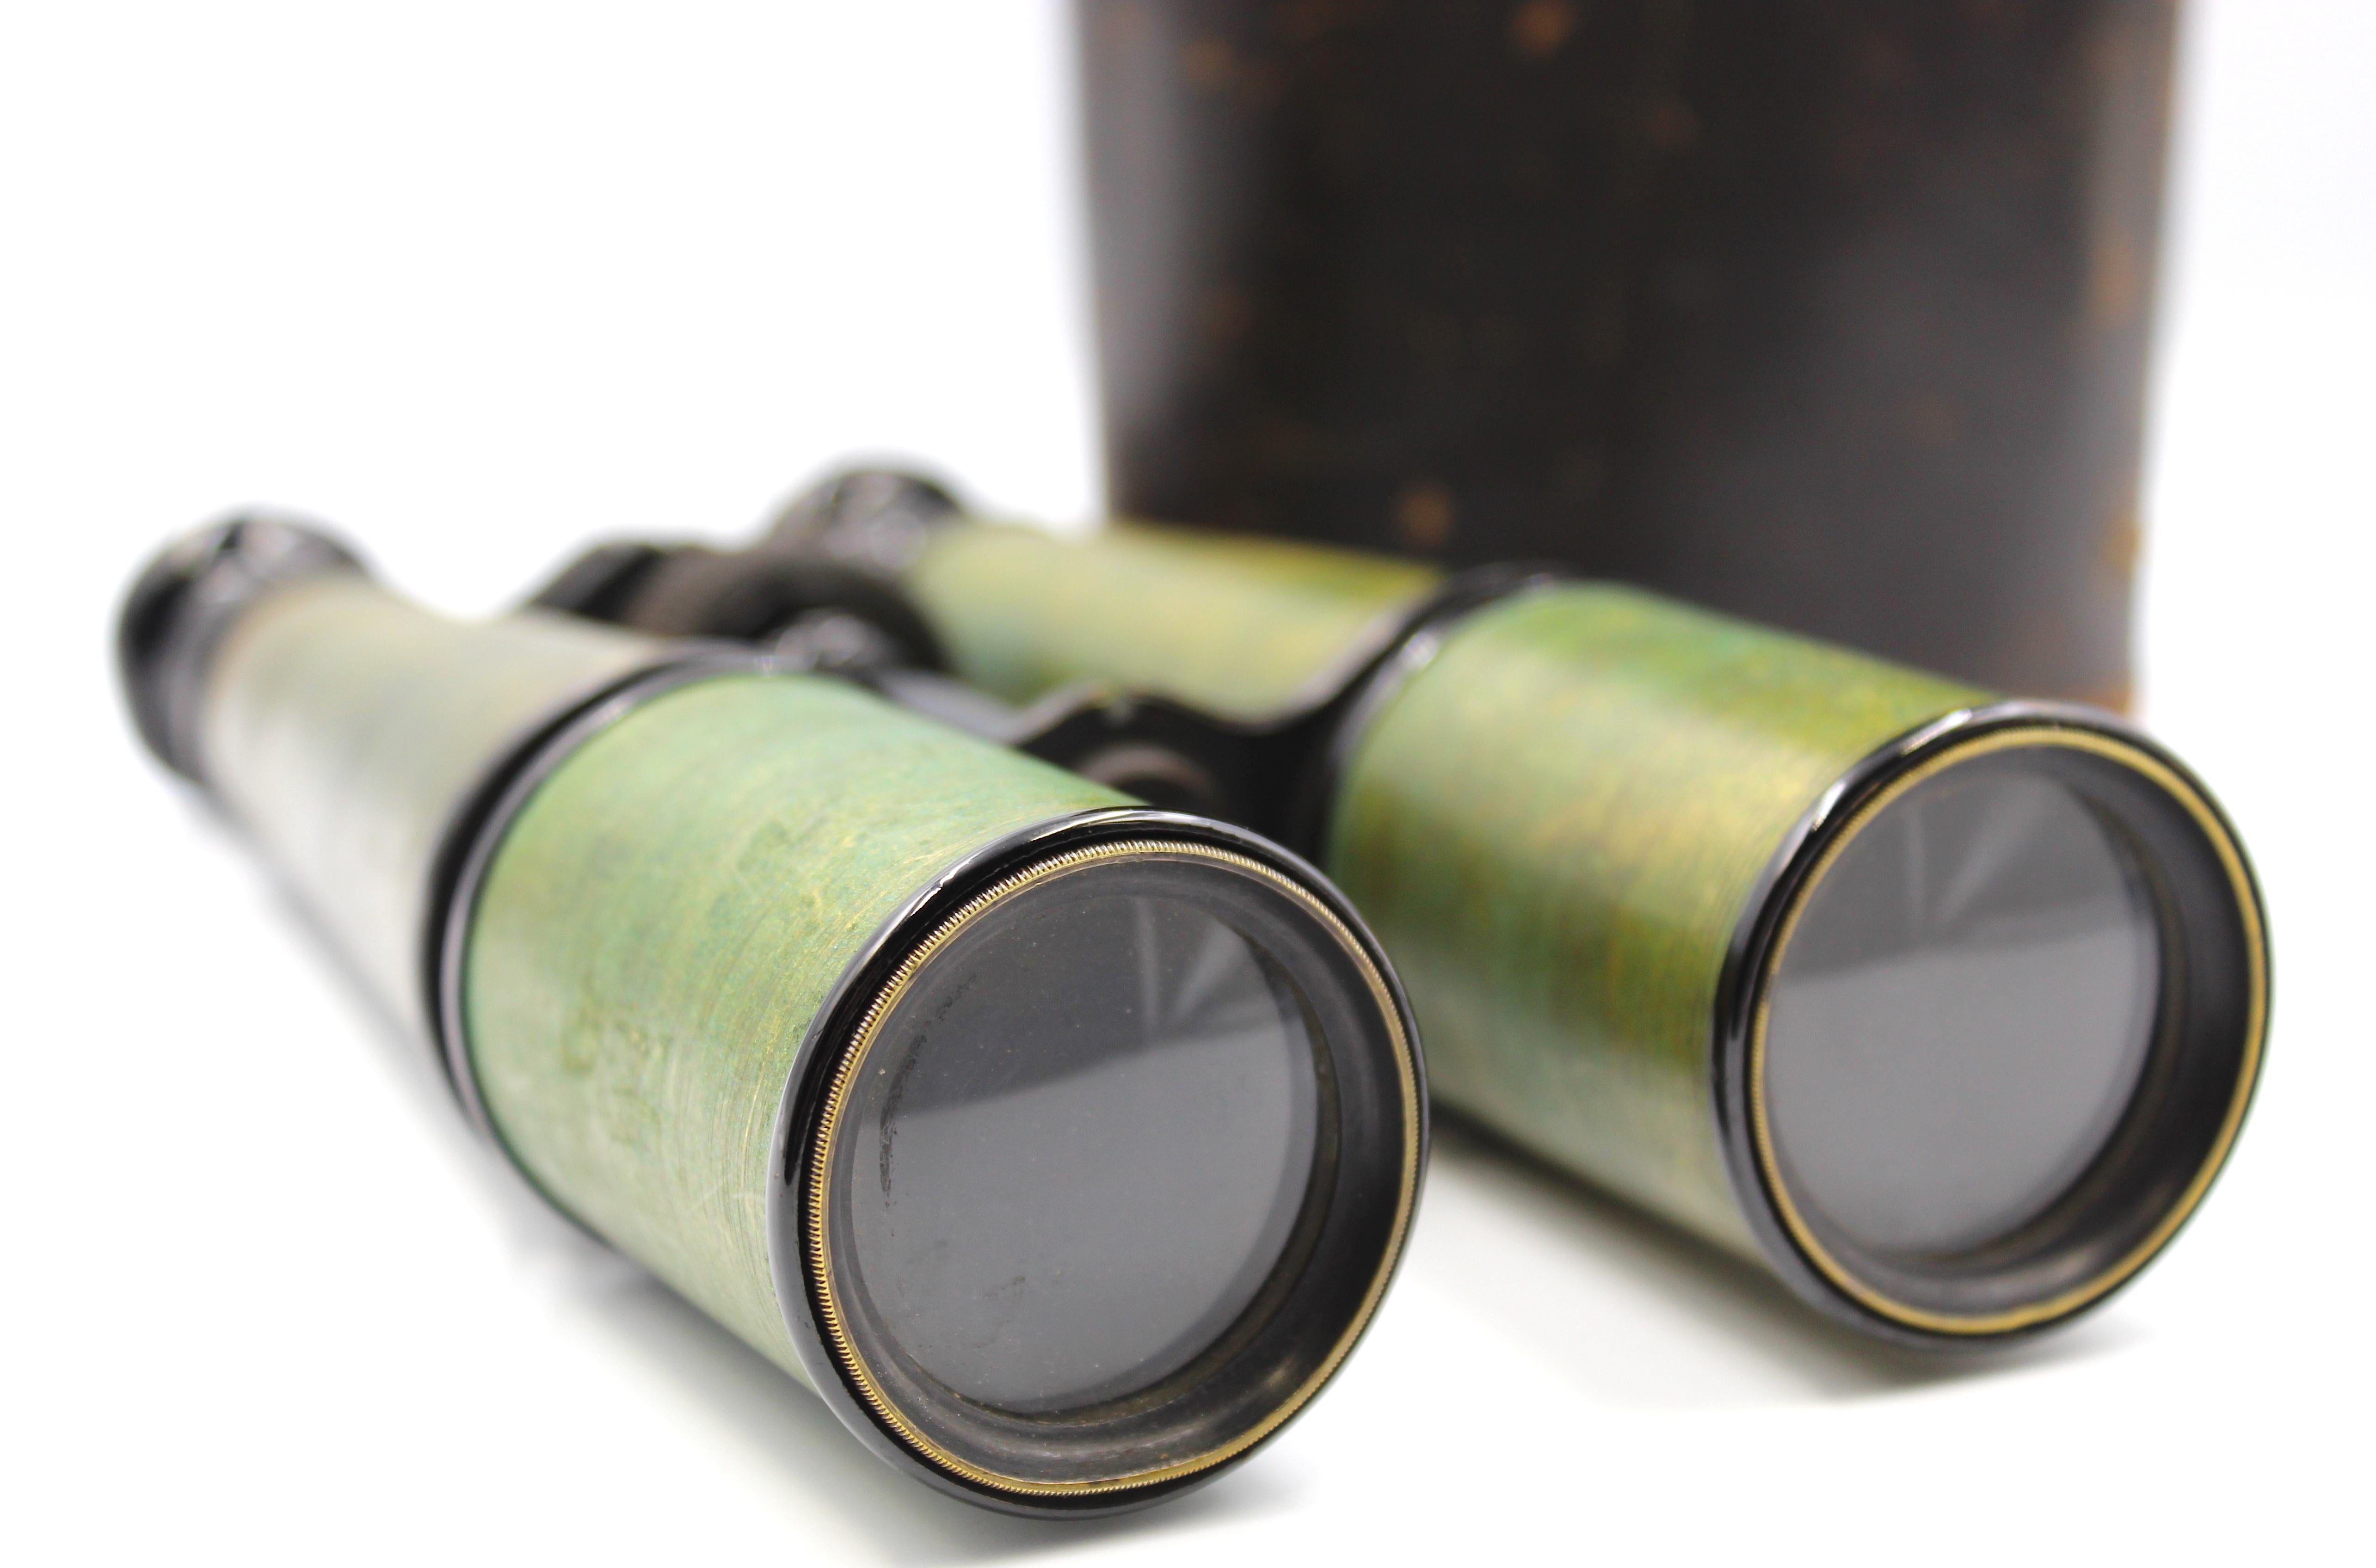 Vintage Civil War Era Field Glasses by Queen & Co. In Good Condition For Sale In Colorado Springs, CO